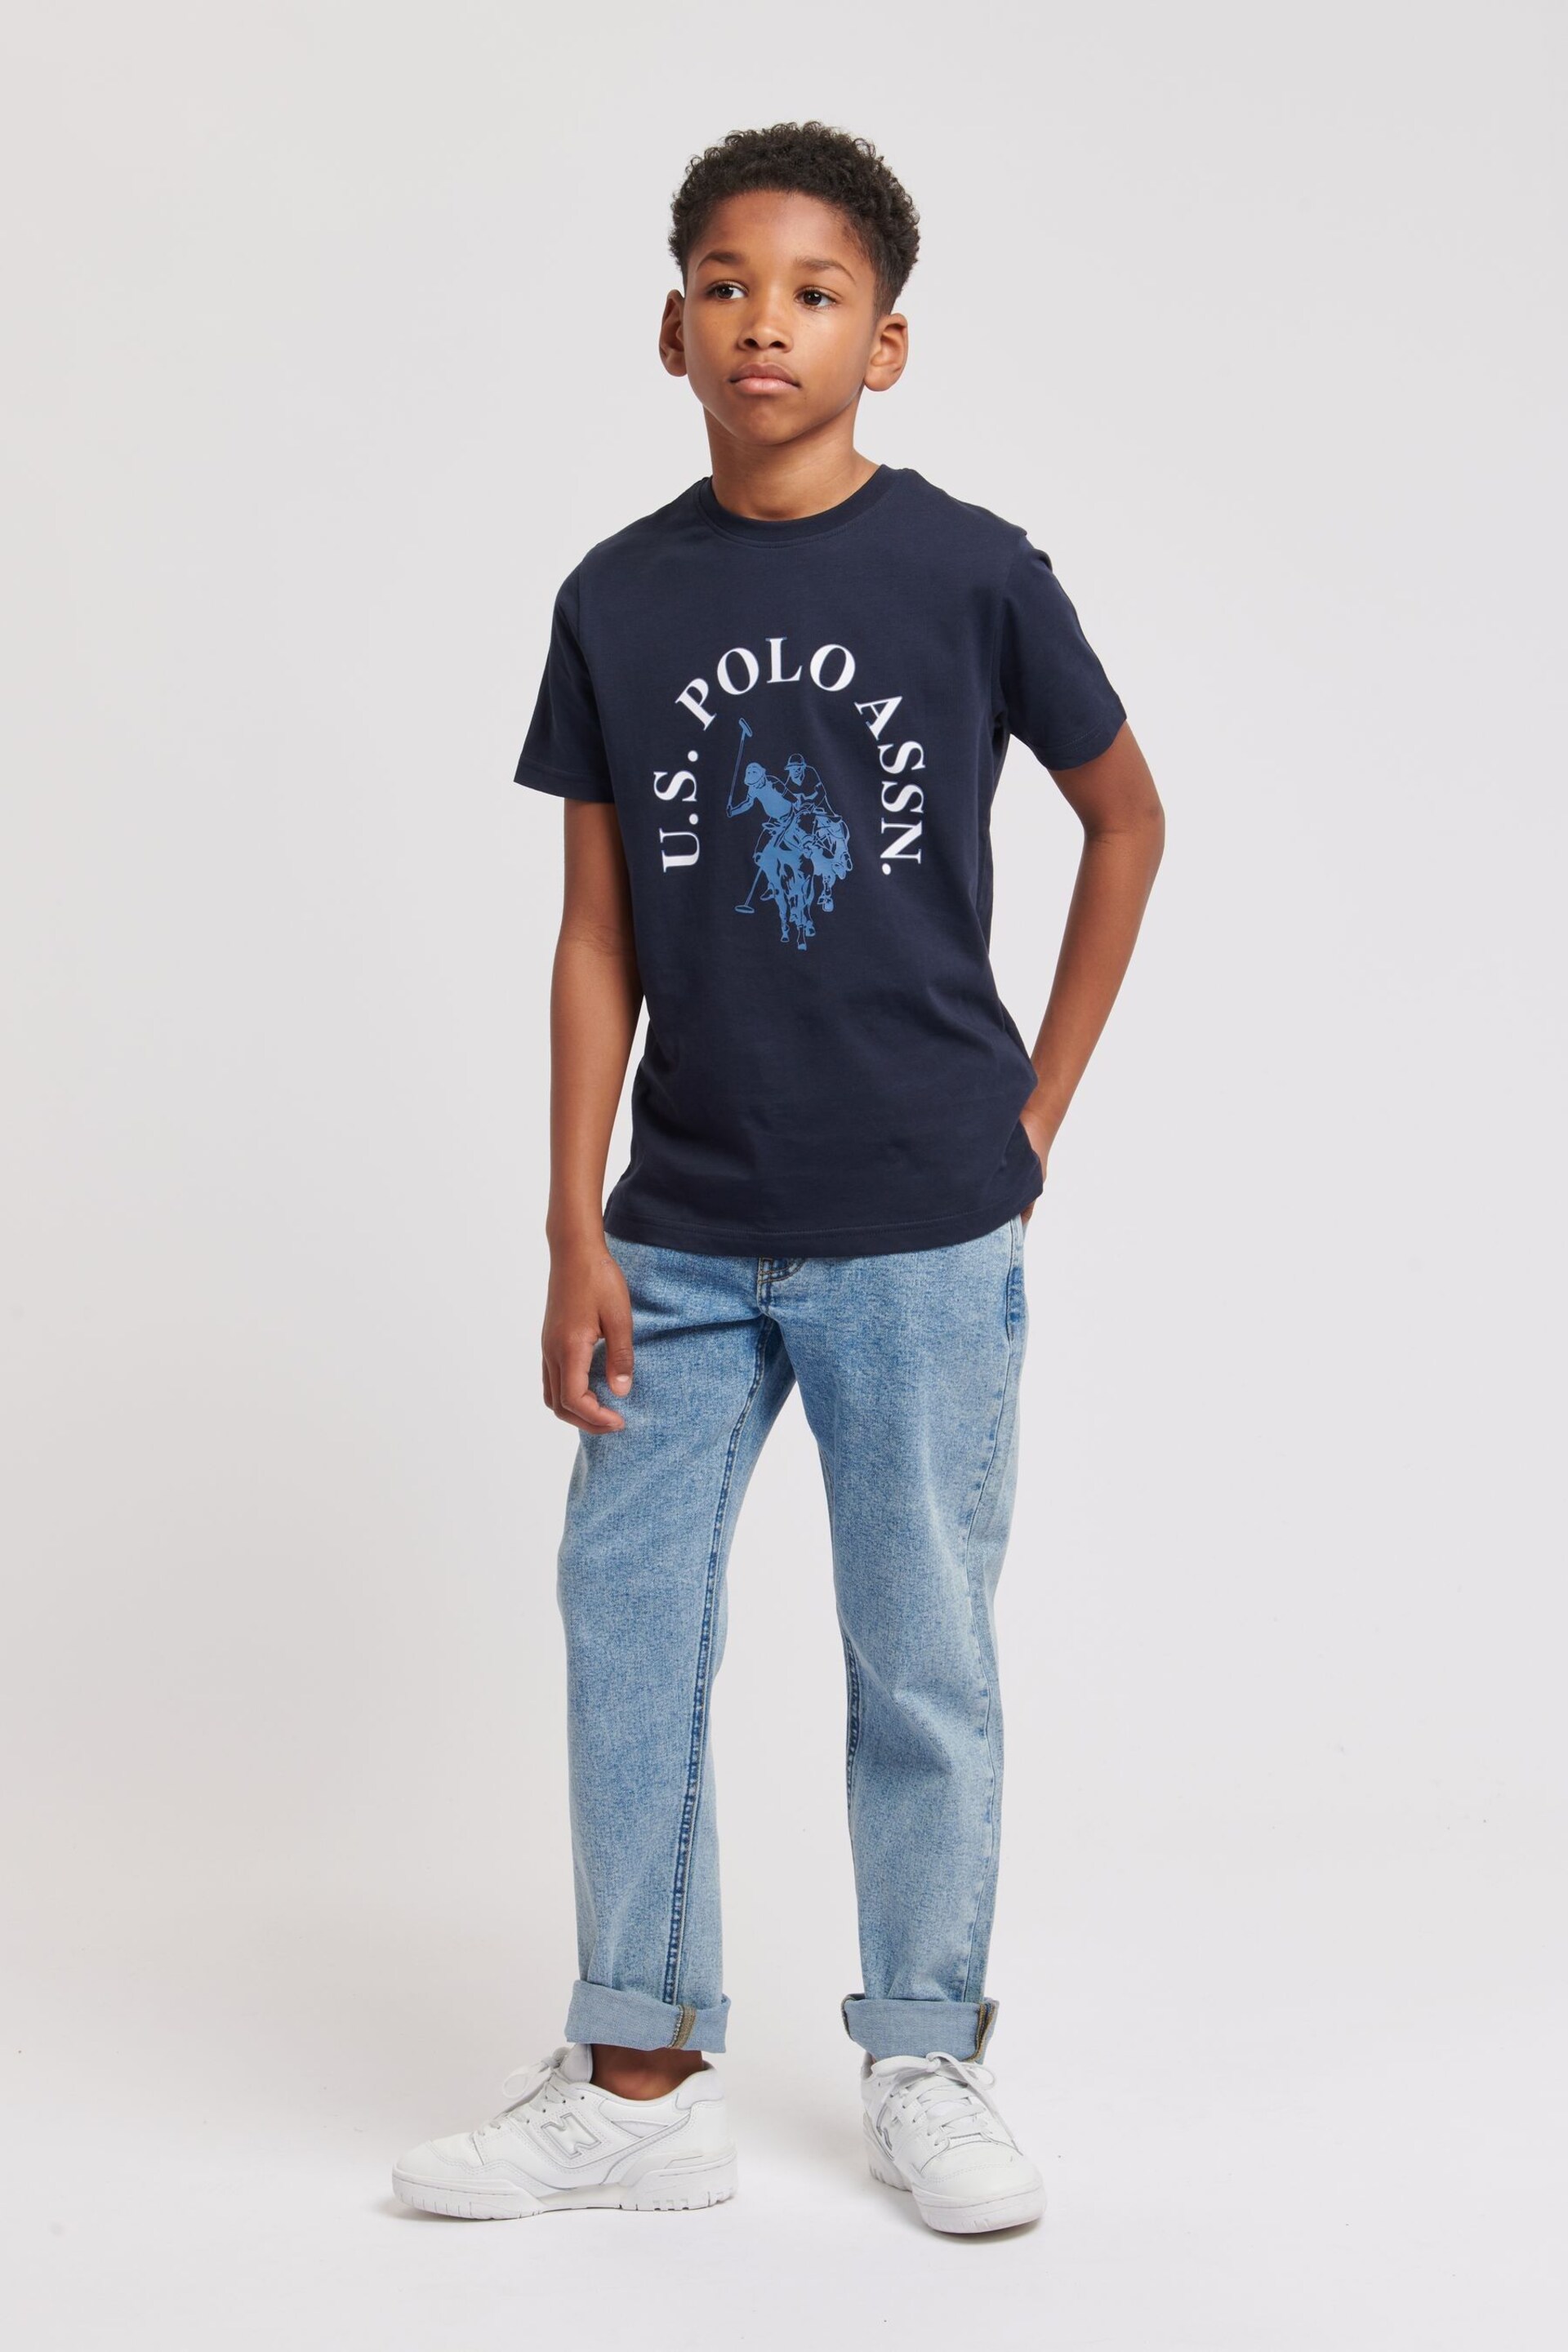 U.S. Polo Assn. Boys Blue Chest Graphic T-Shirt - Image 3 of 8